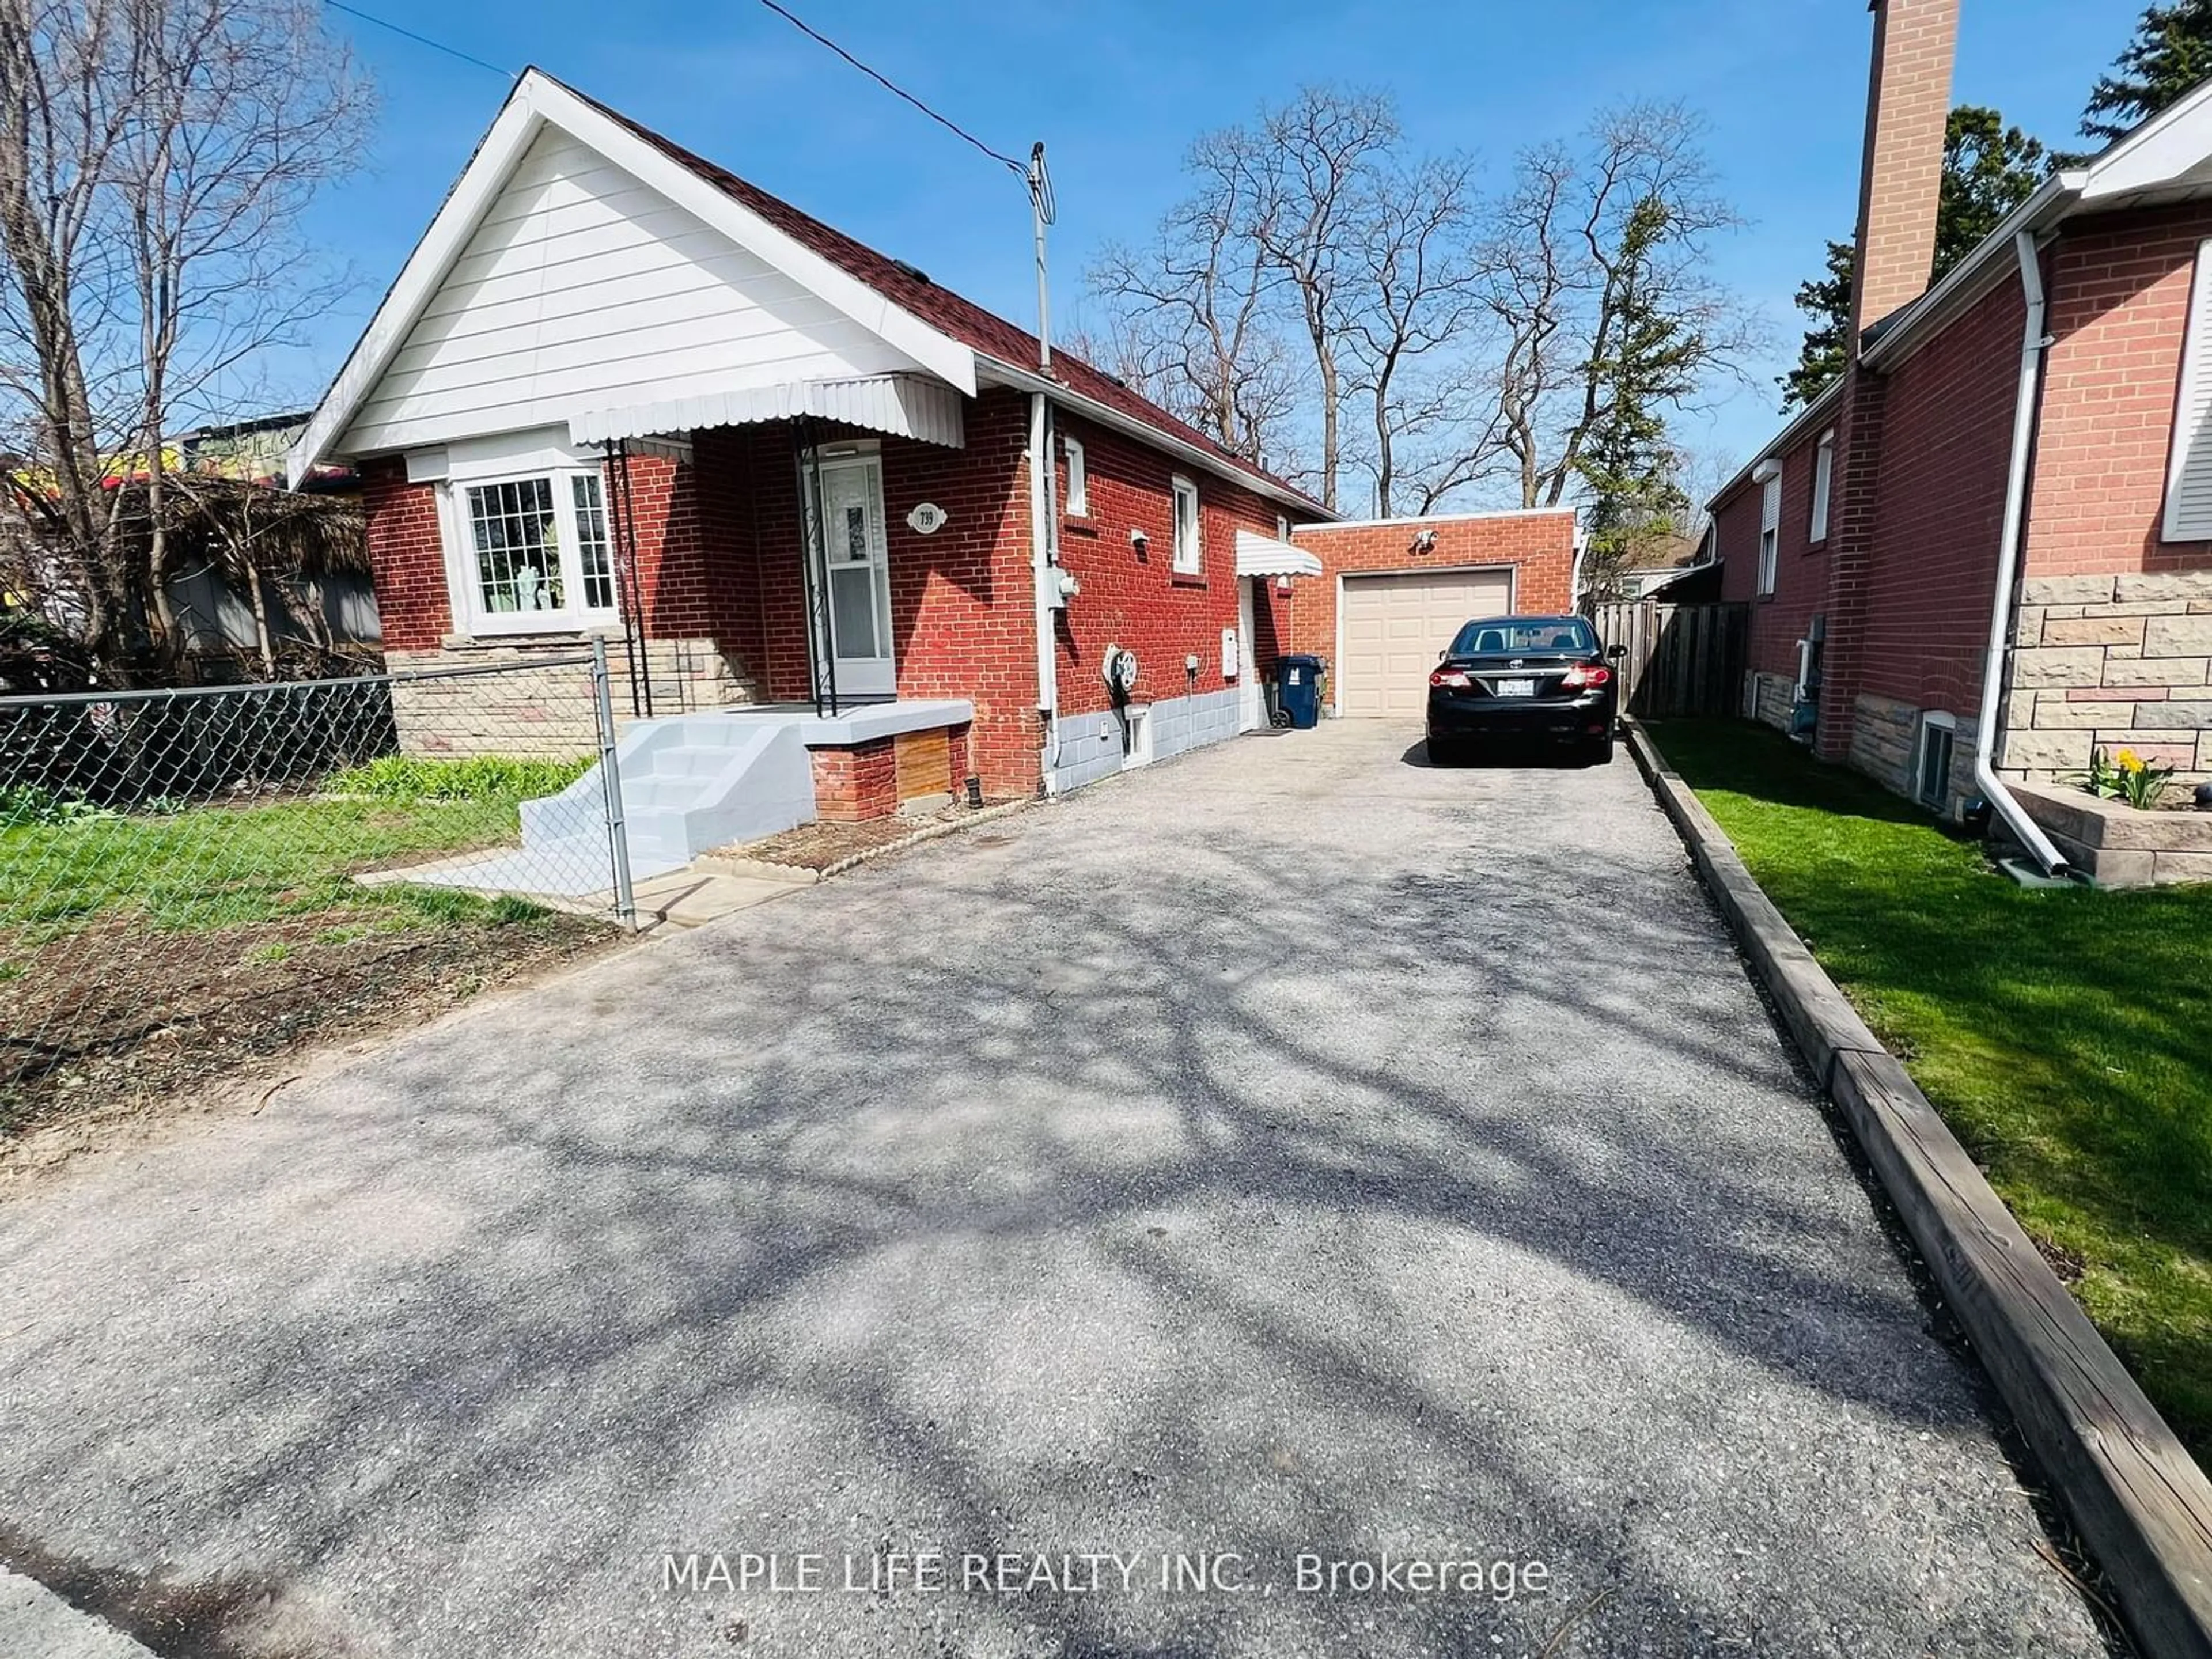 Frontside or backside of a home for 739 Pharmacy Ave, Toronto Ontario M1L 3J4